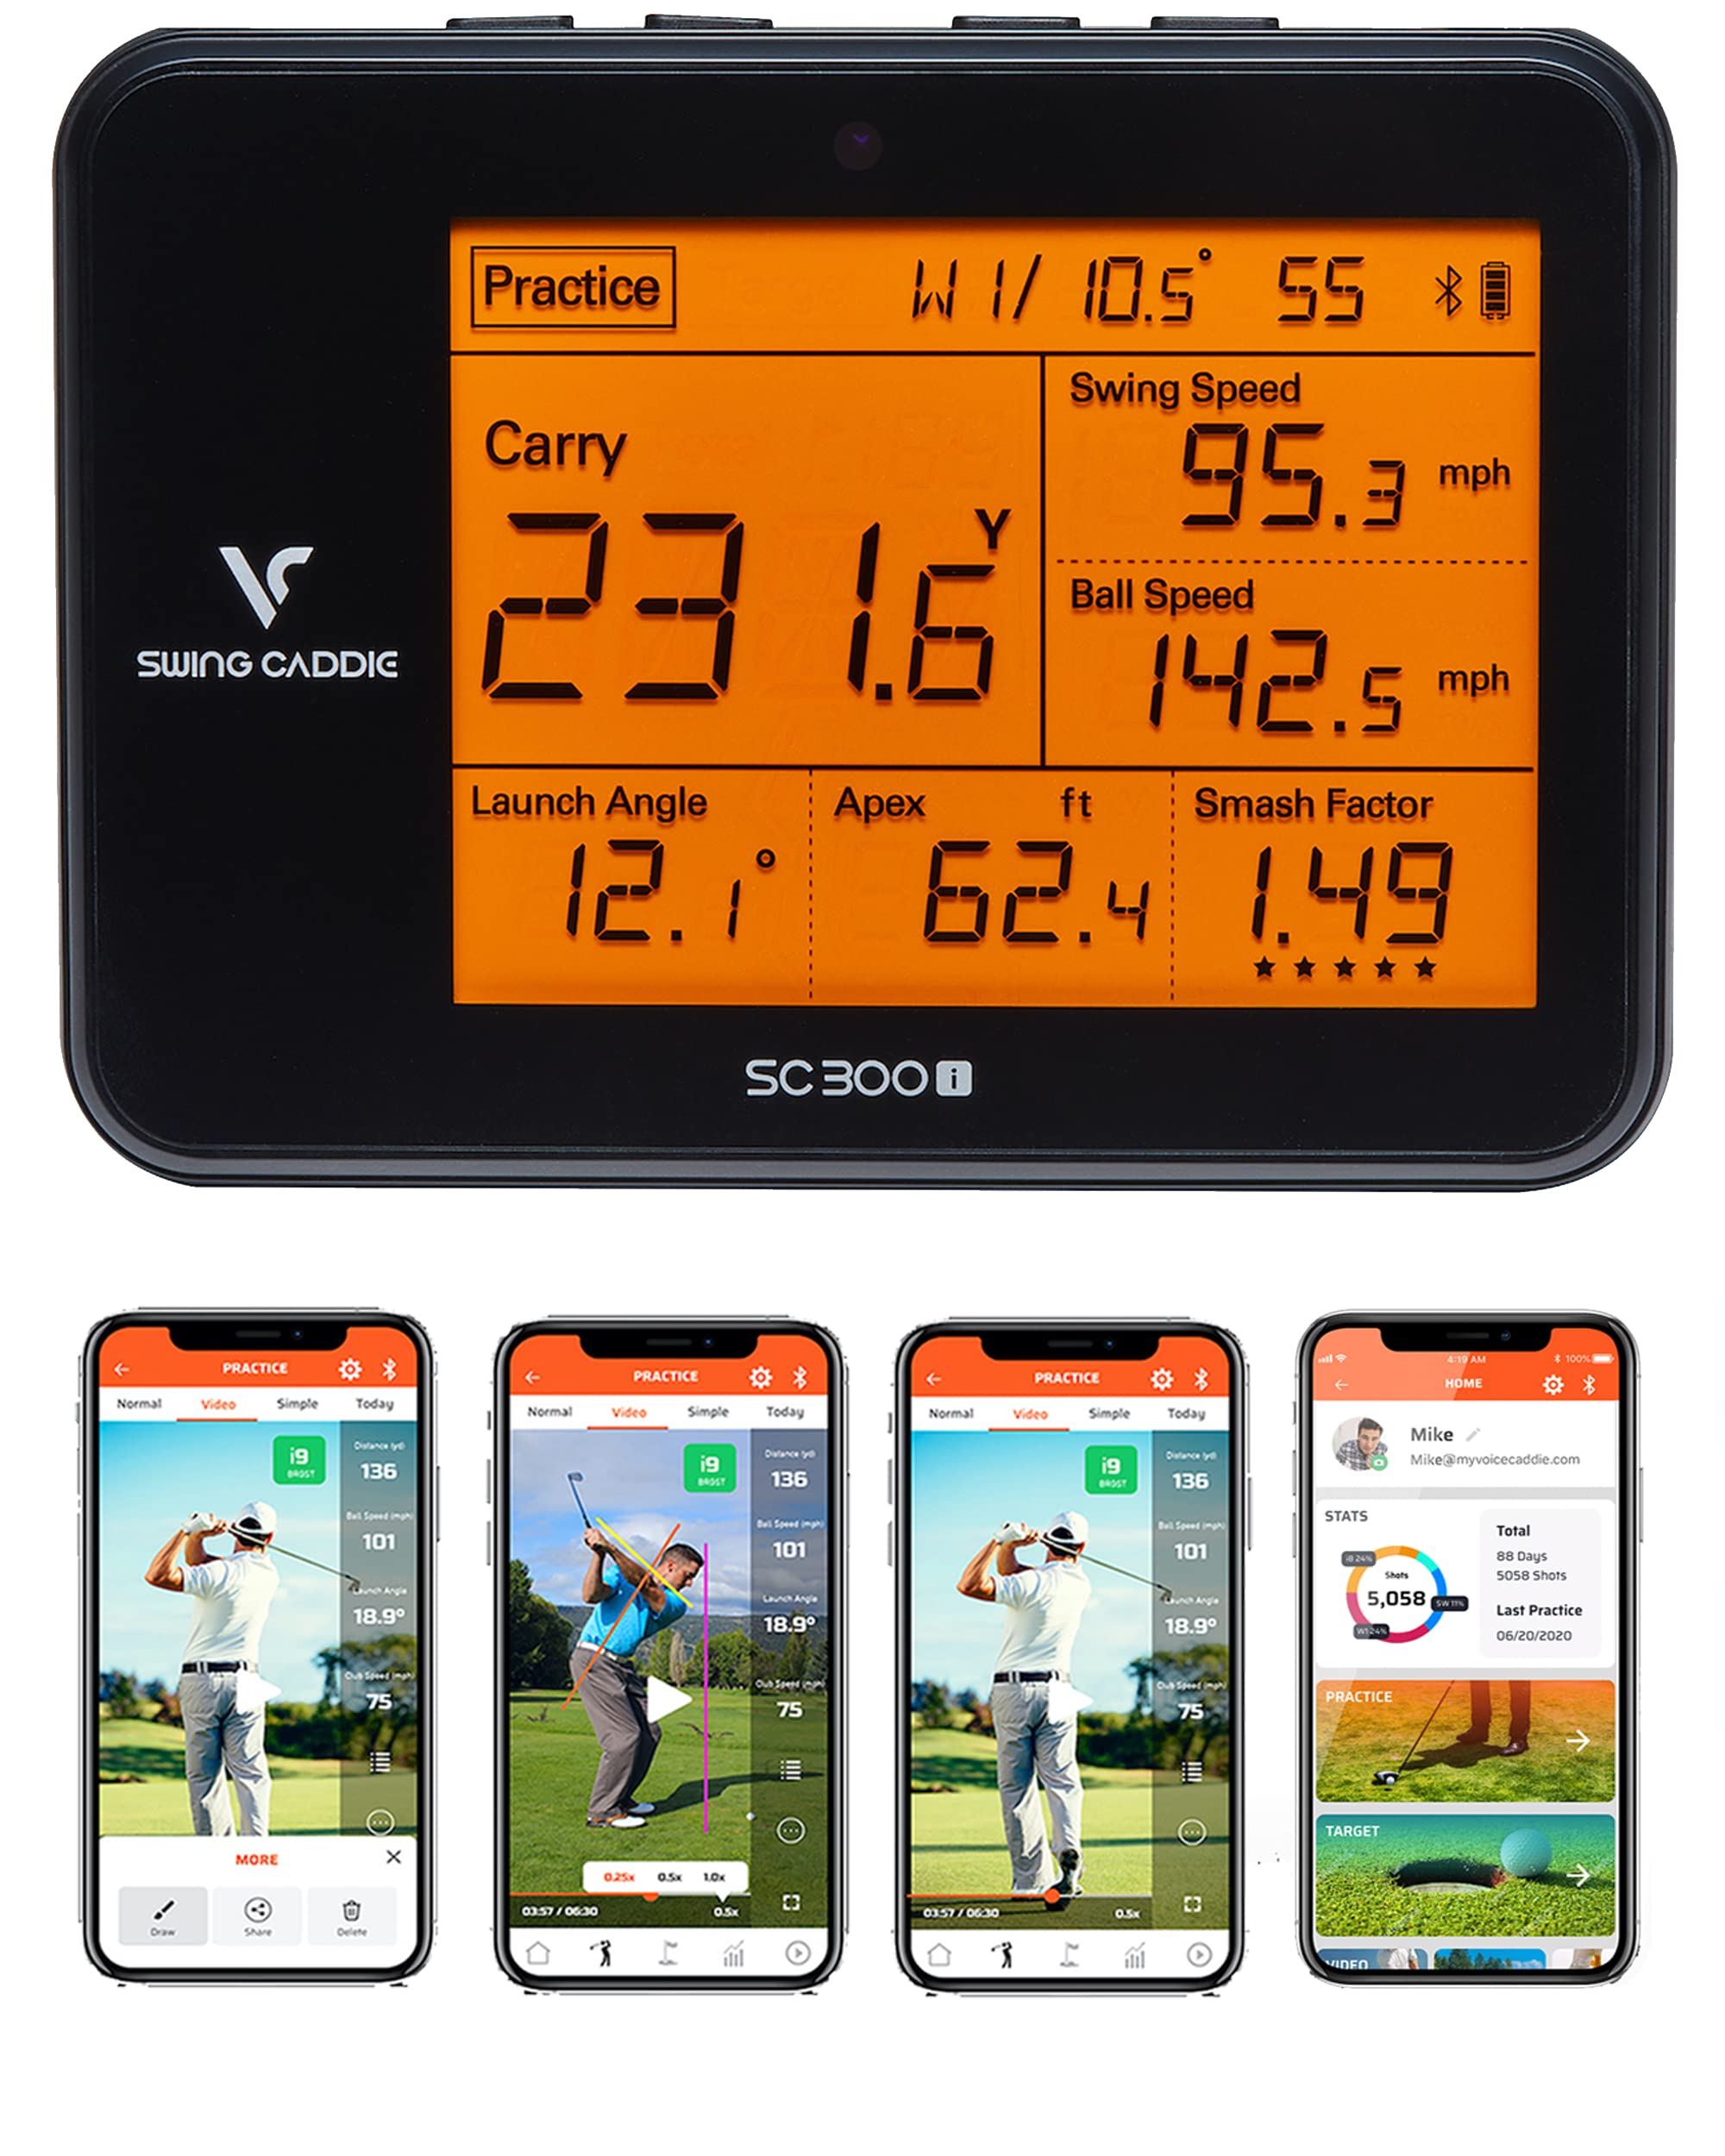 PlayBetter Swing Caddie SC300i Golf Launch Monitor by Voice Caddie | Official Accessories Bundles | Choose from Protective Case, Charger, Gift | Carry/Total Distance, Smash Factor, Ball Speed